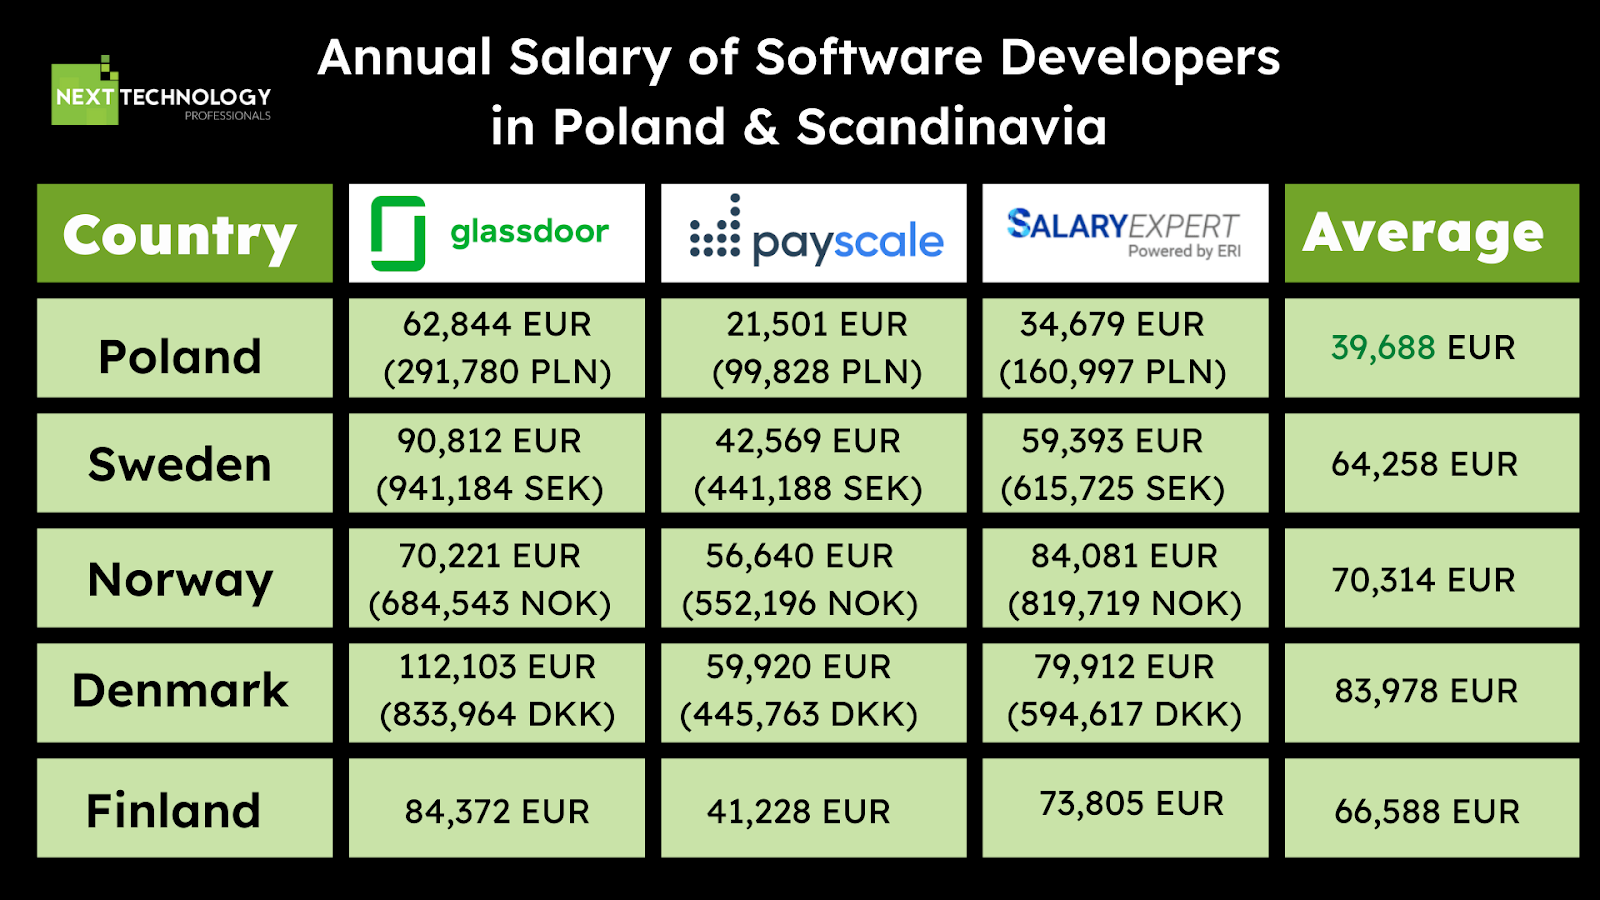 annual salary of software developers in Poland and Scandinavia